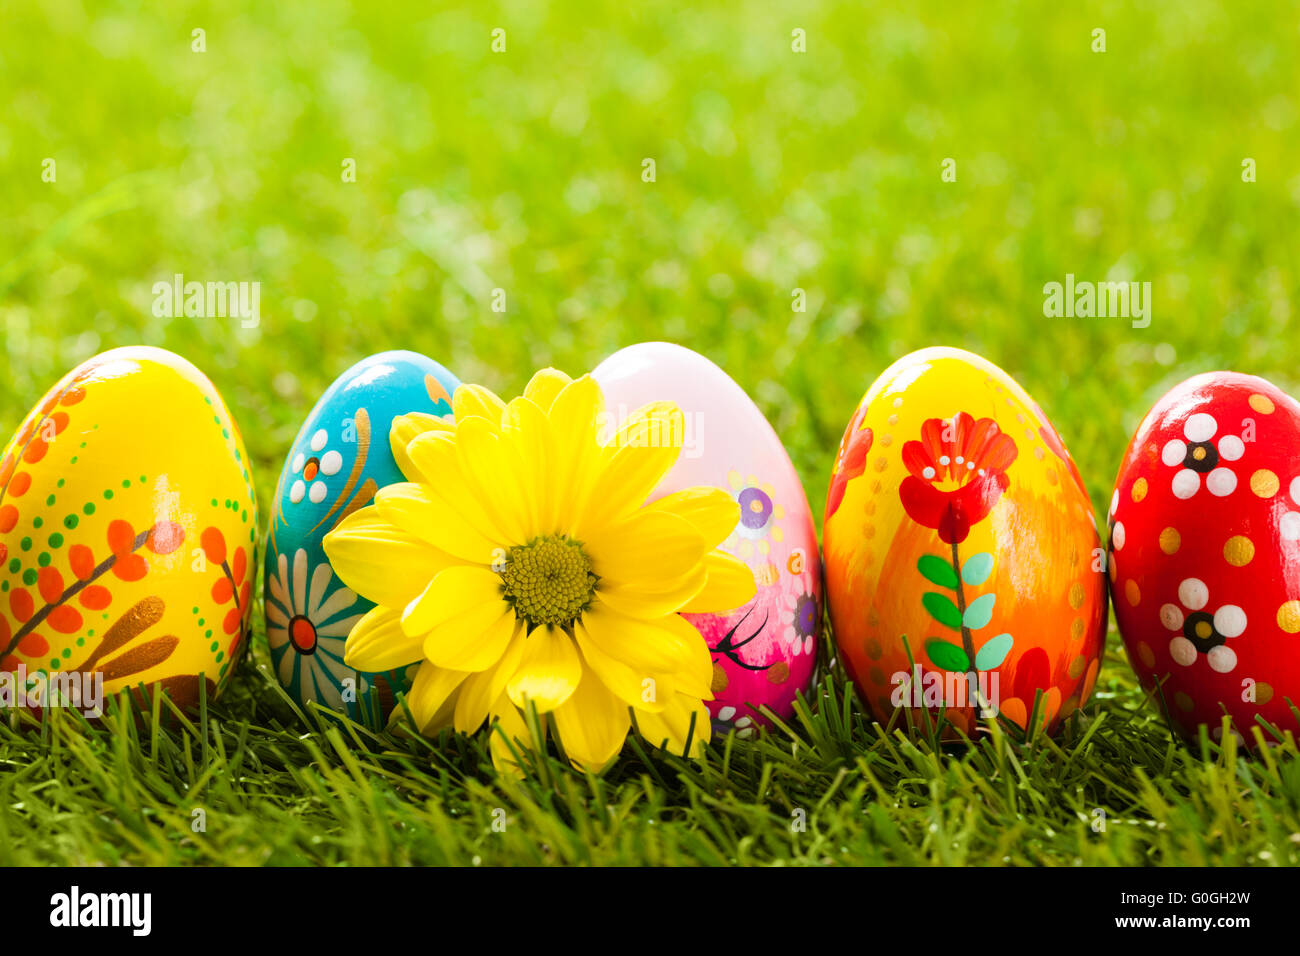 Colorful hand painted Easter eggs and spring flowers in grass Stock Photo